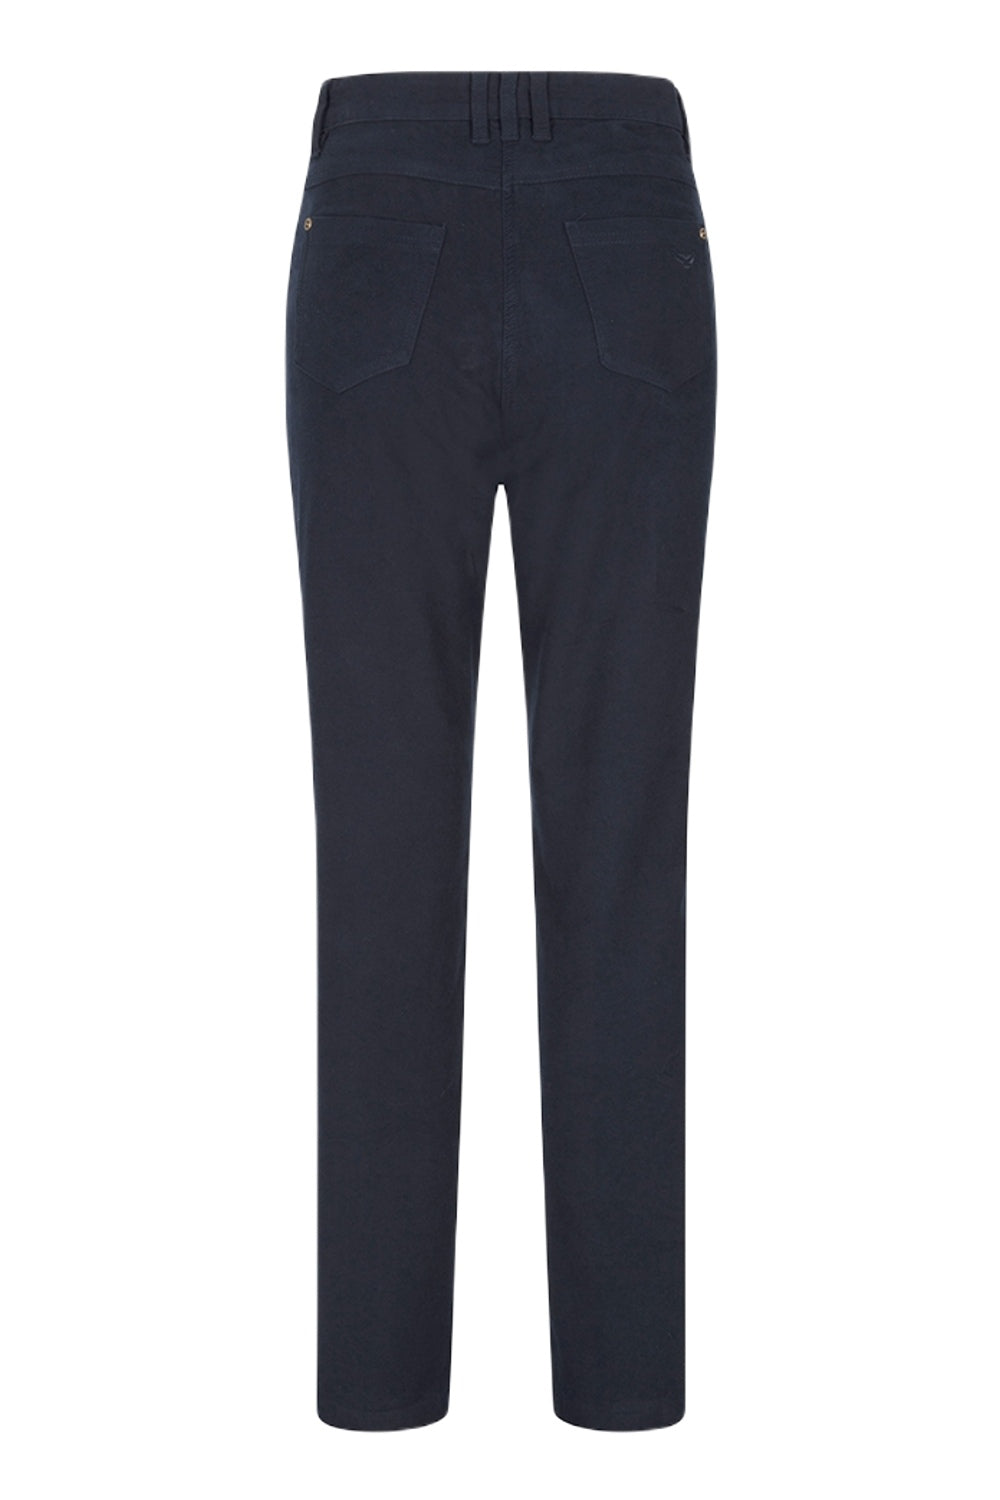 Hoggs of Fife Catrine Ladies Technical Stretch Moleskin Jeans in Midnight Navy 